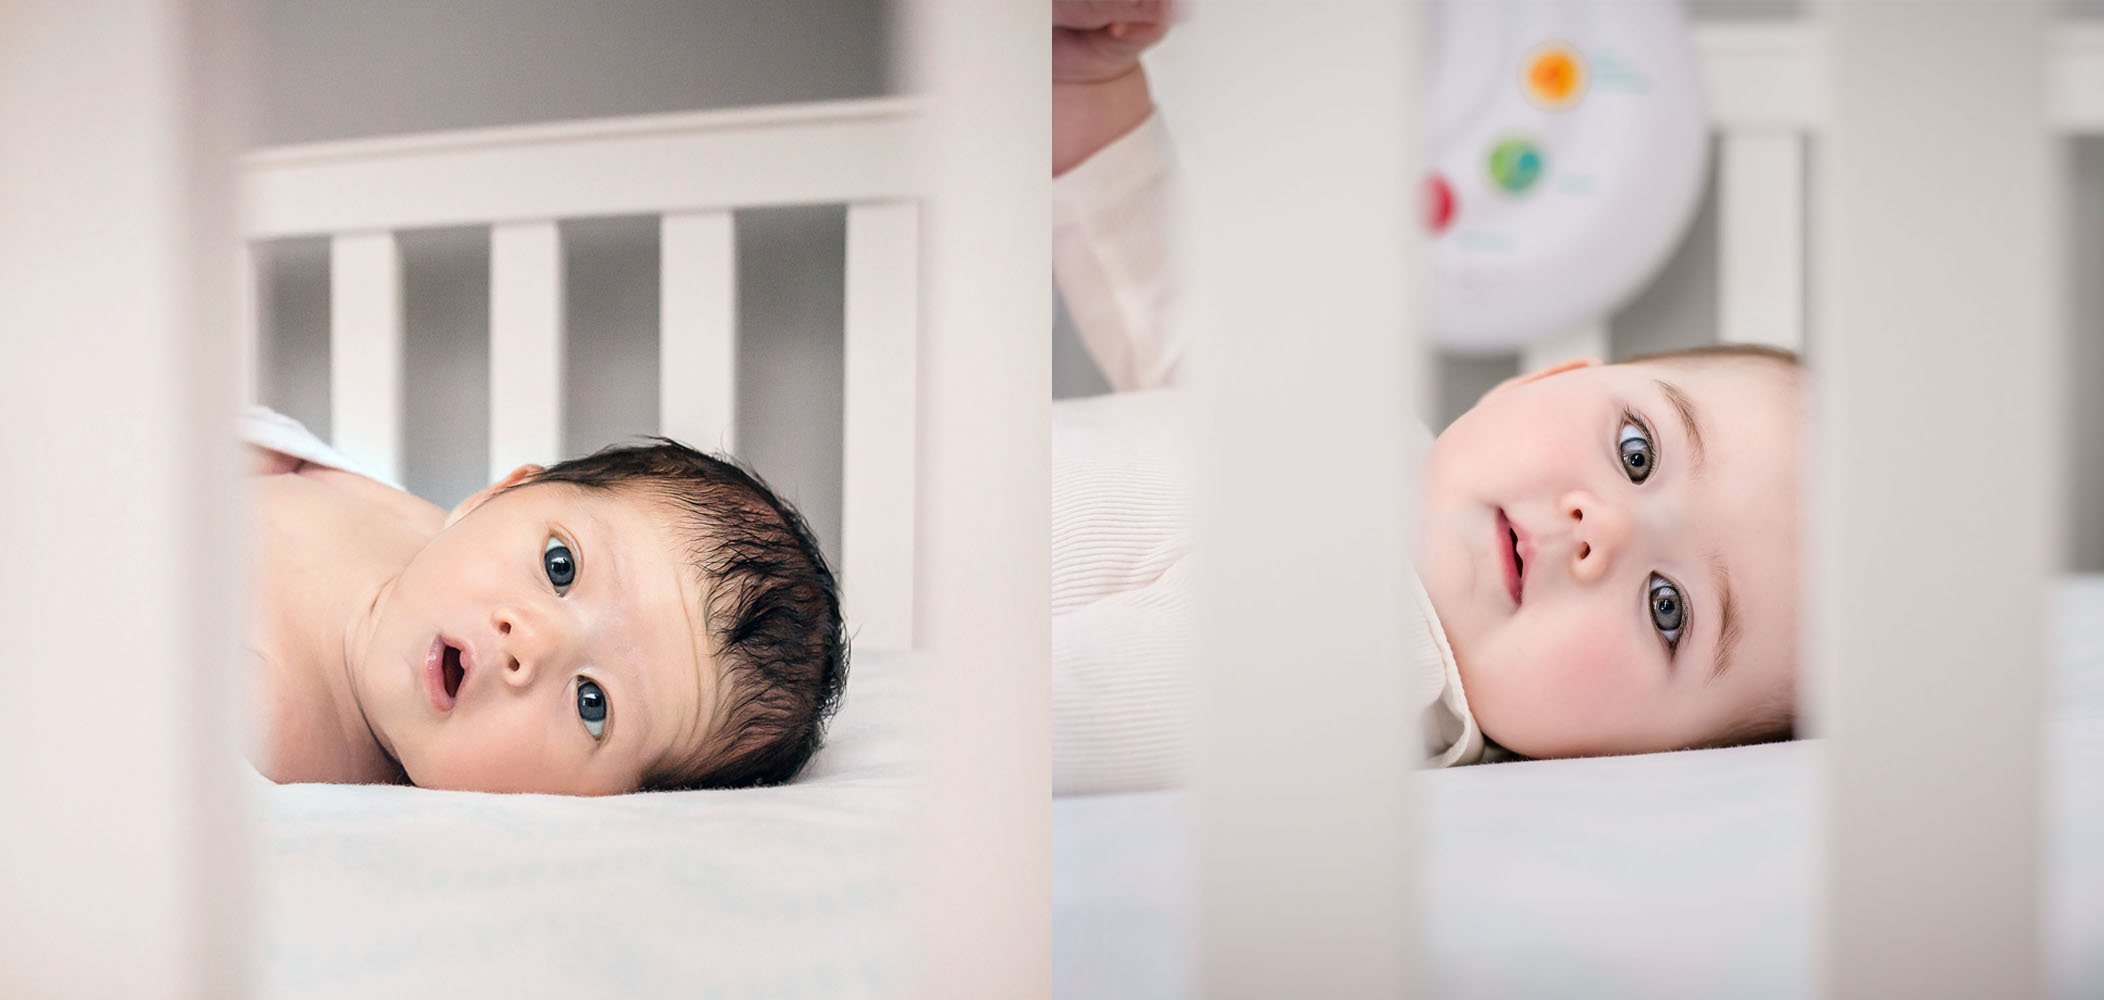 comparing a baby's growth by showing a similar photo taken 6 months apart in the crib